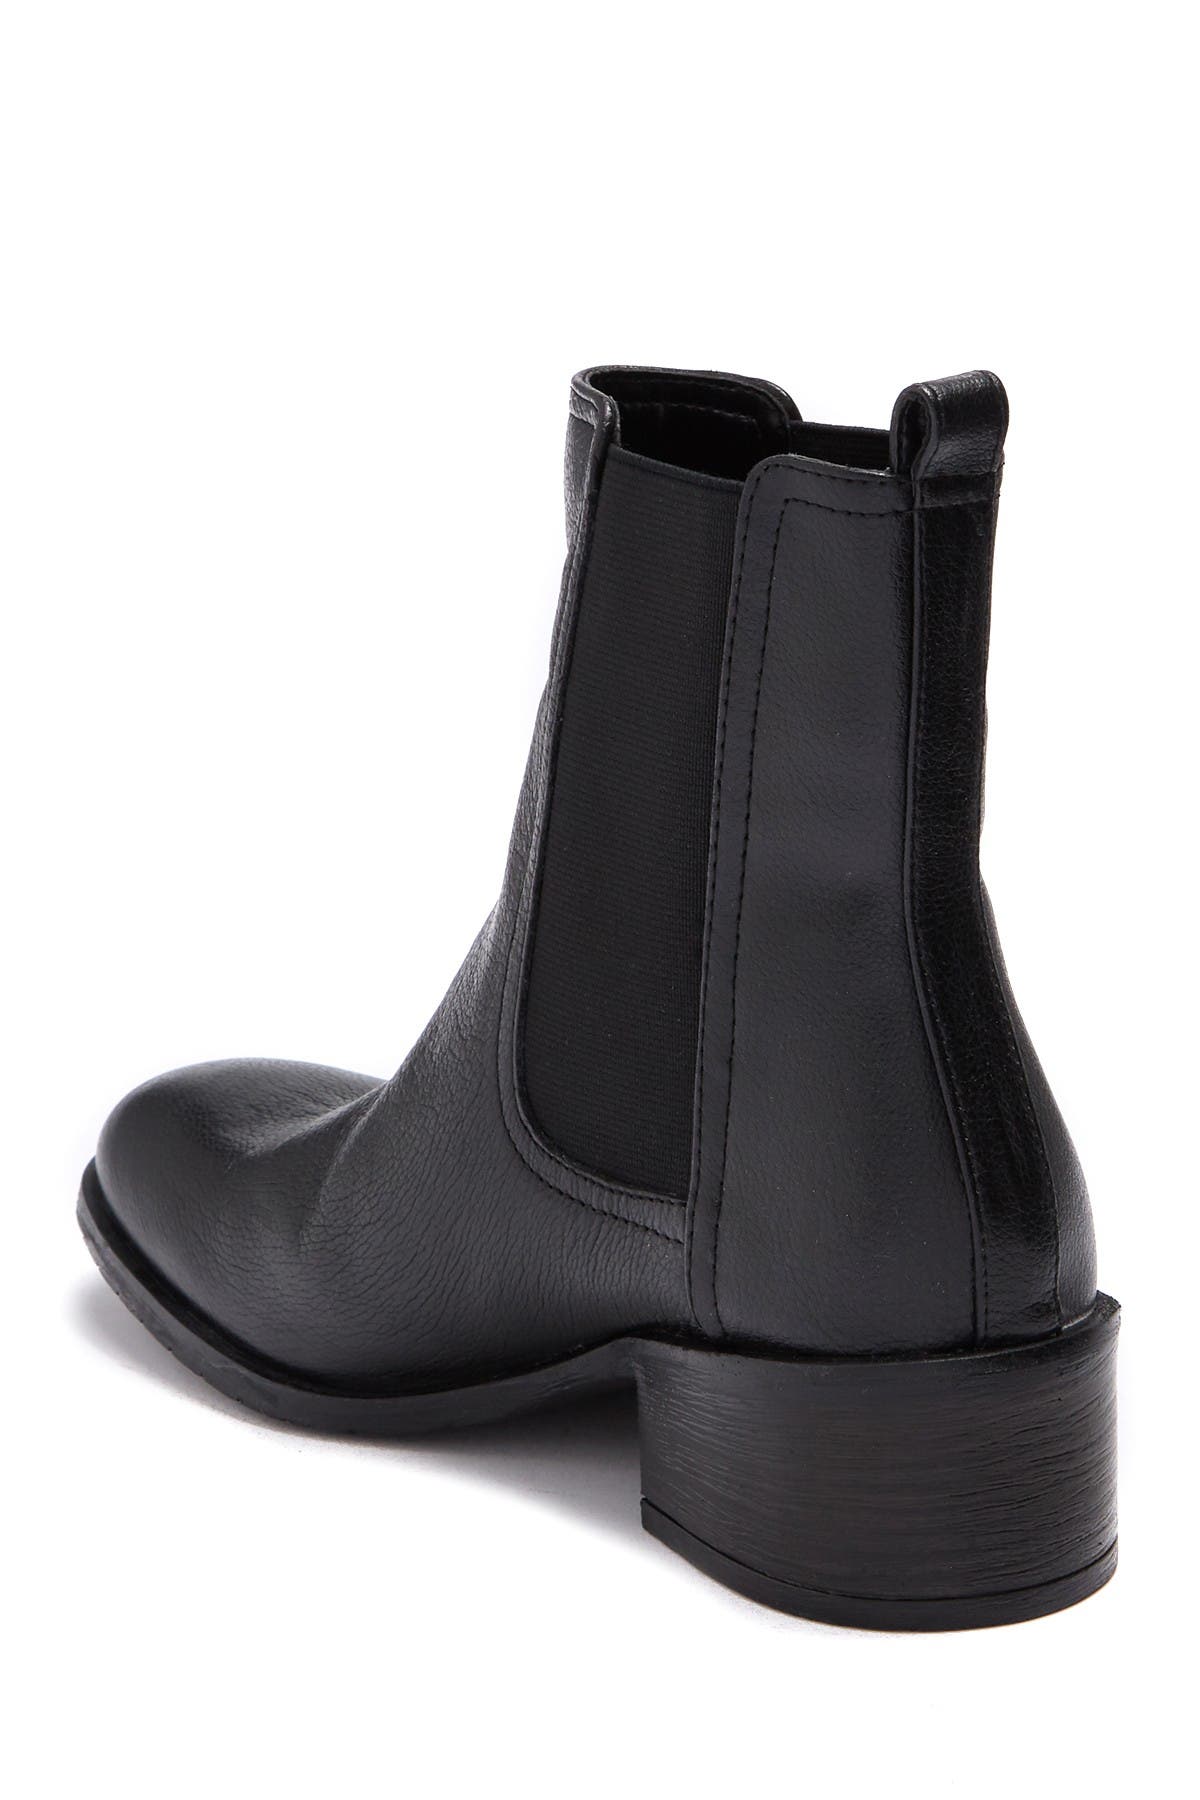 kenneth cole black boots